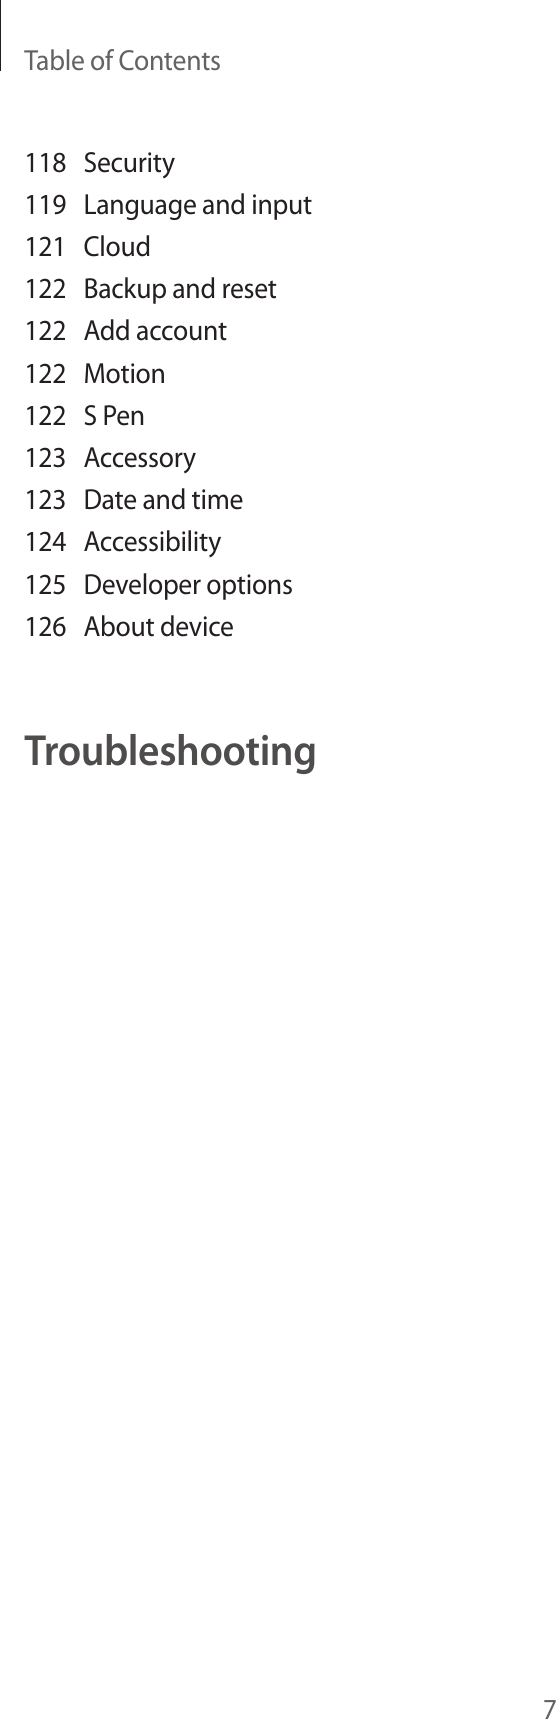 Table of Contents7118 Security119  Language and input121 Cloud122  Backup and reset122  Add account122 Motion122  S Pen123 Accessory123  Date and time124 Accessibility125  Developer options126  About deviceTroubleshooting